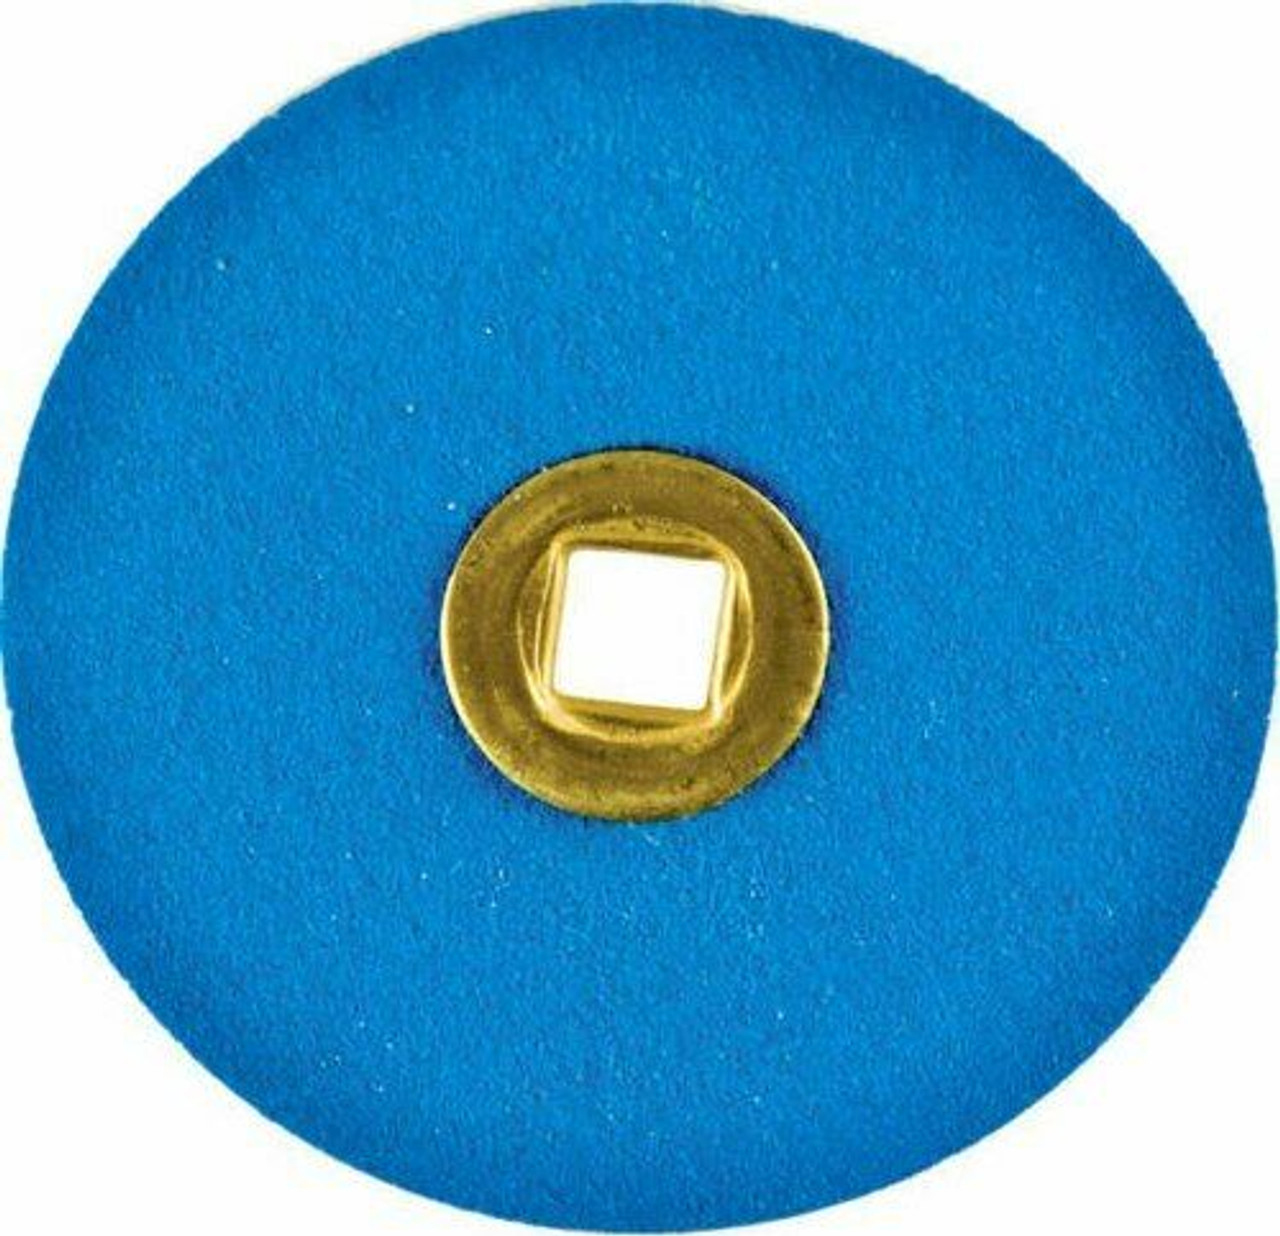 BRASS CENTER BLUE ZIRCONIA DISC 1 1/2"(38mm) FINE grit box of 100 - Click Image to Close